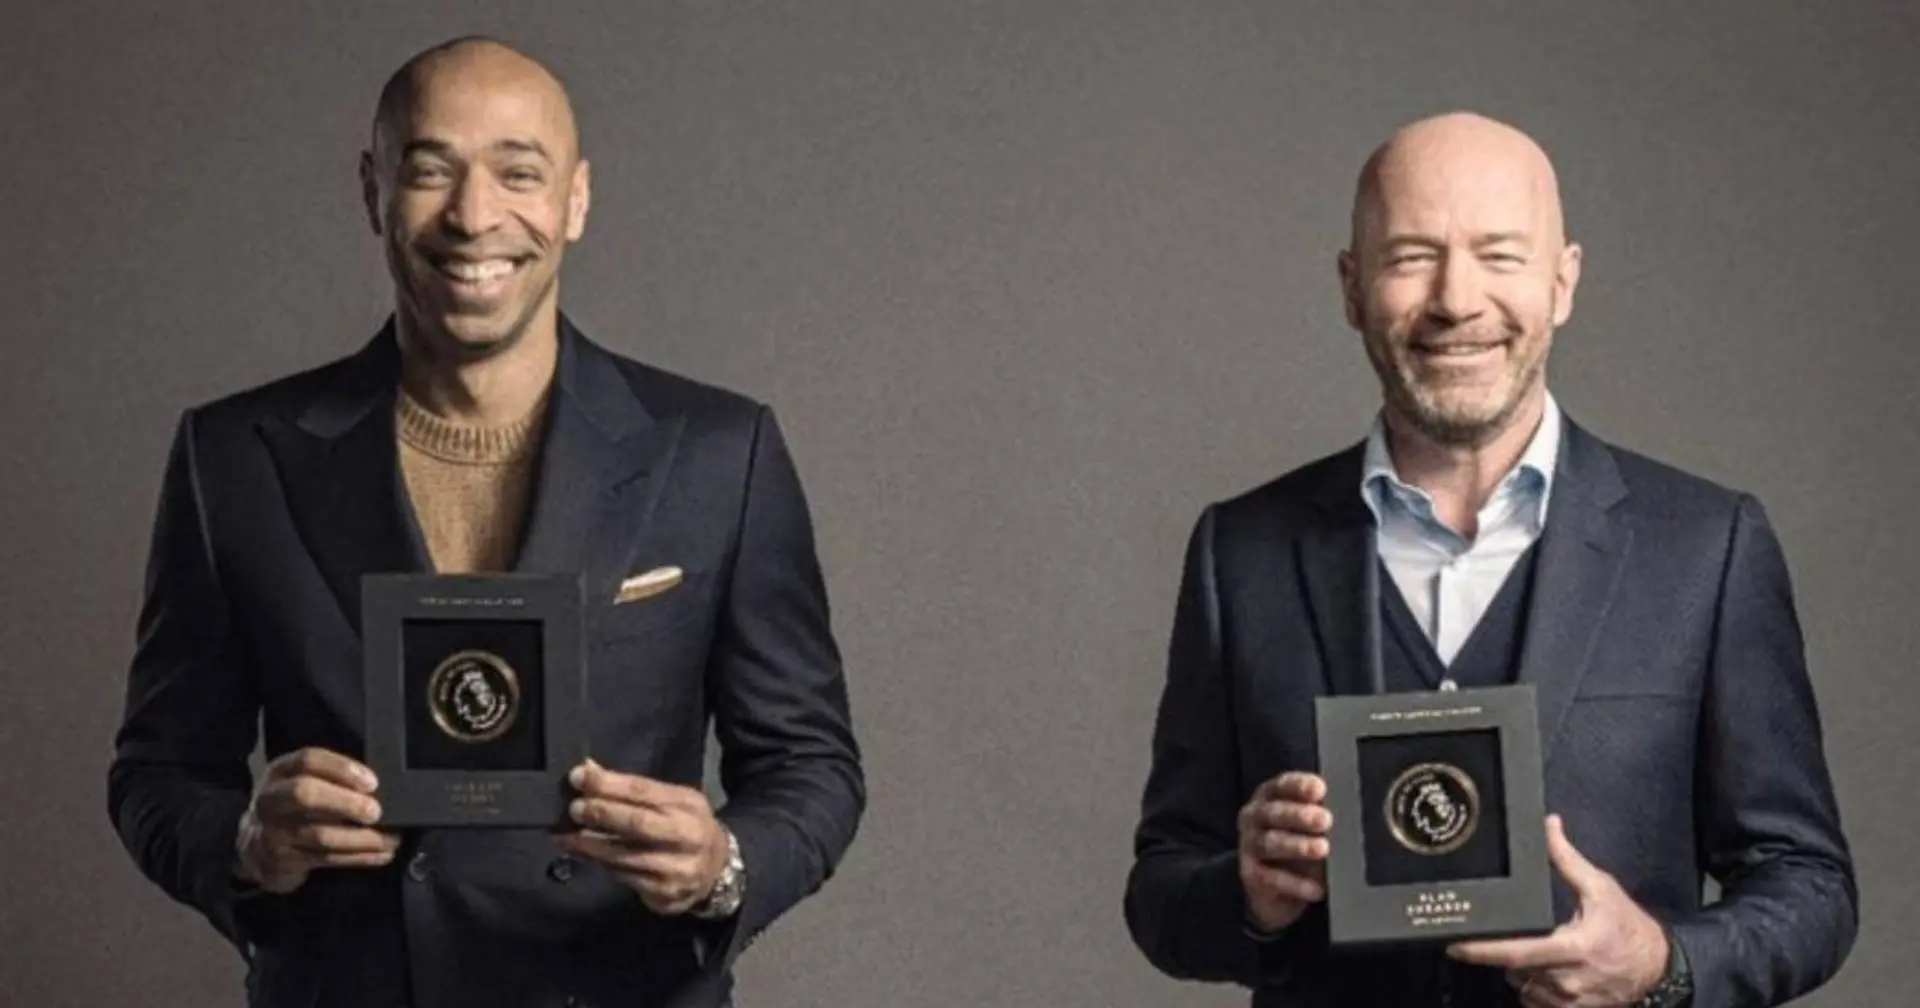 Henry included in PL's Hall of Fame as one of first two inductees alongside Shearer